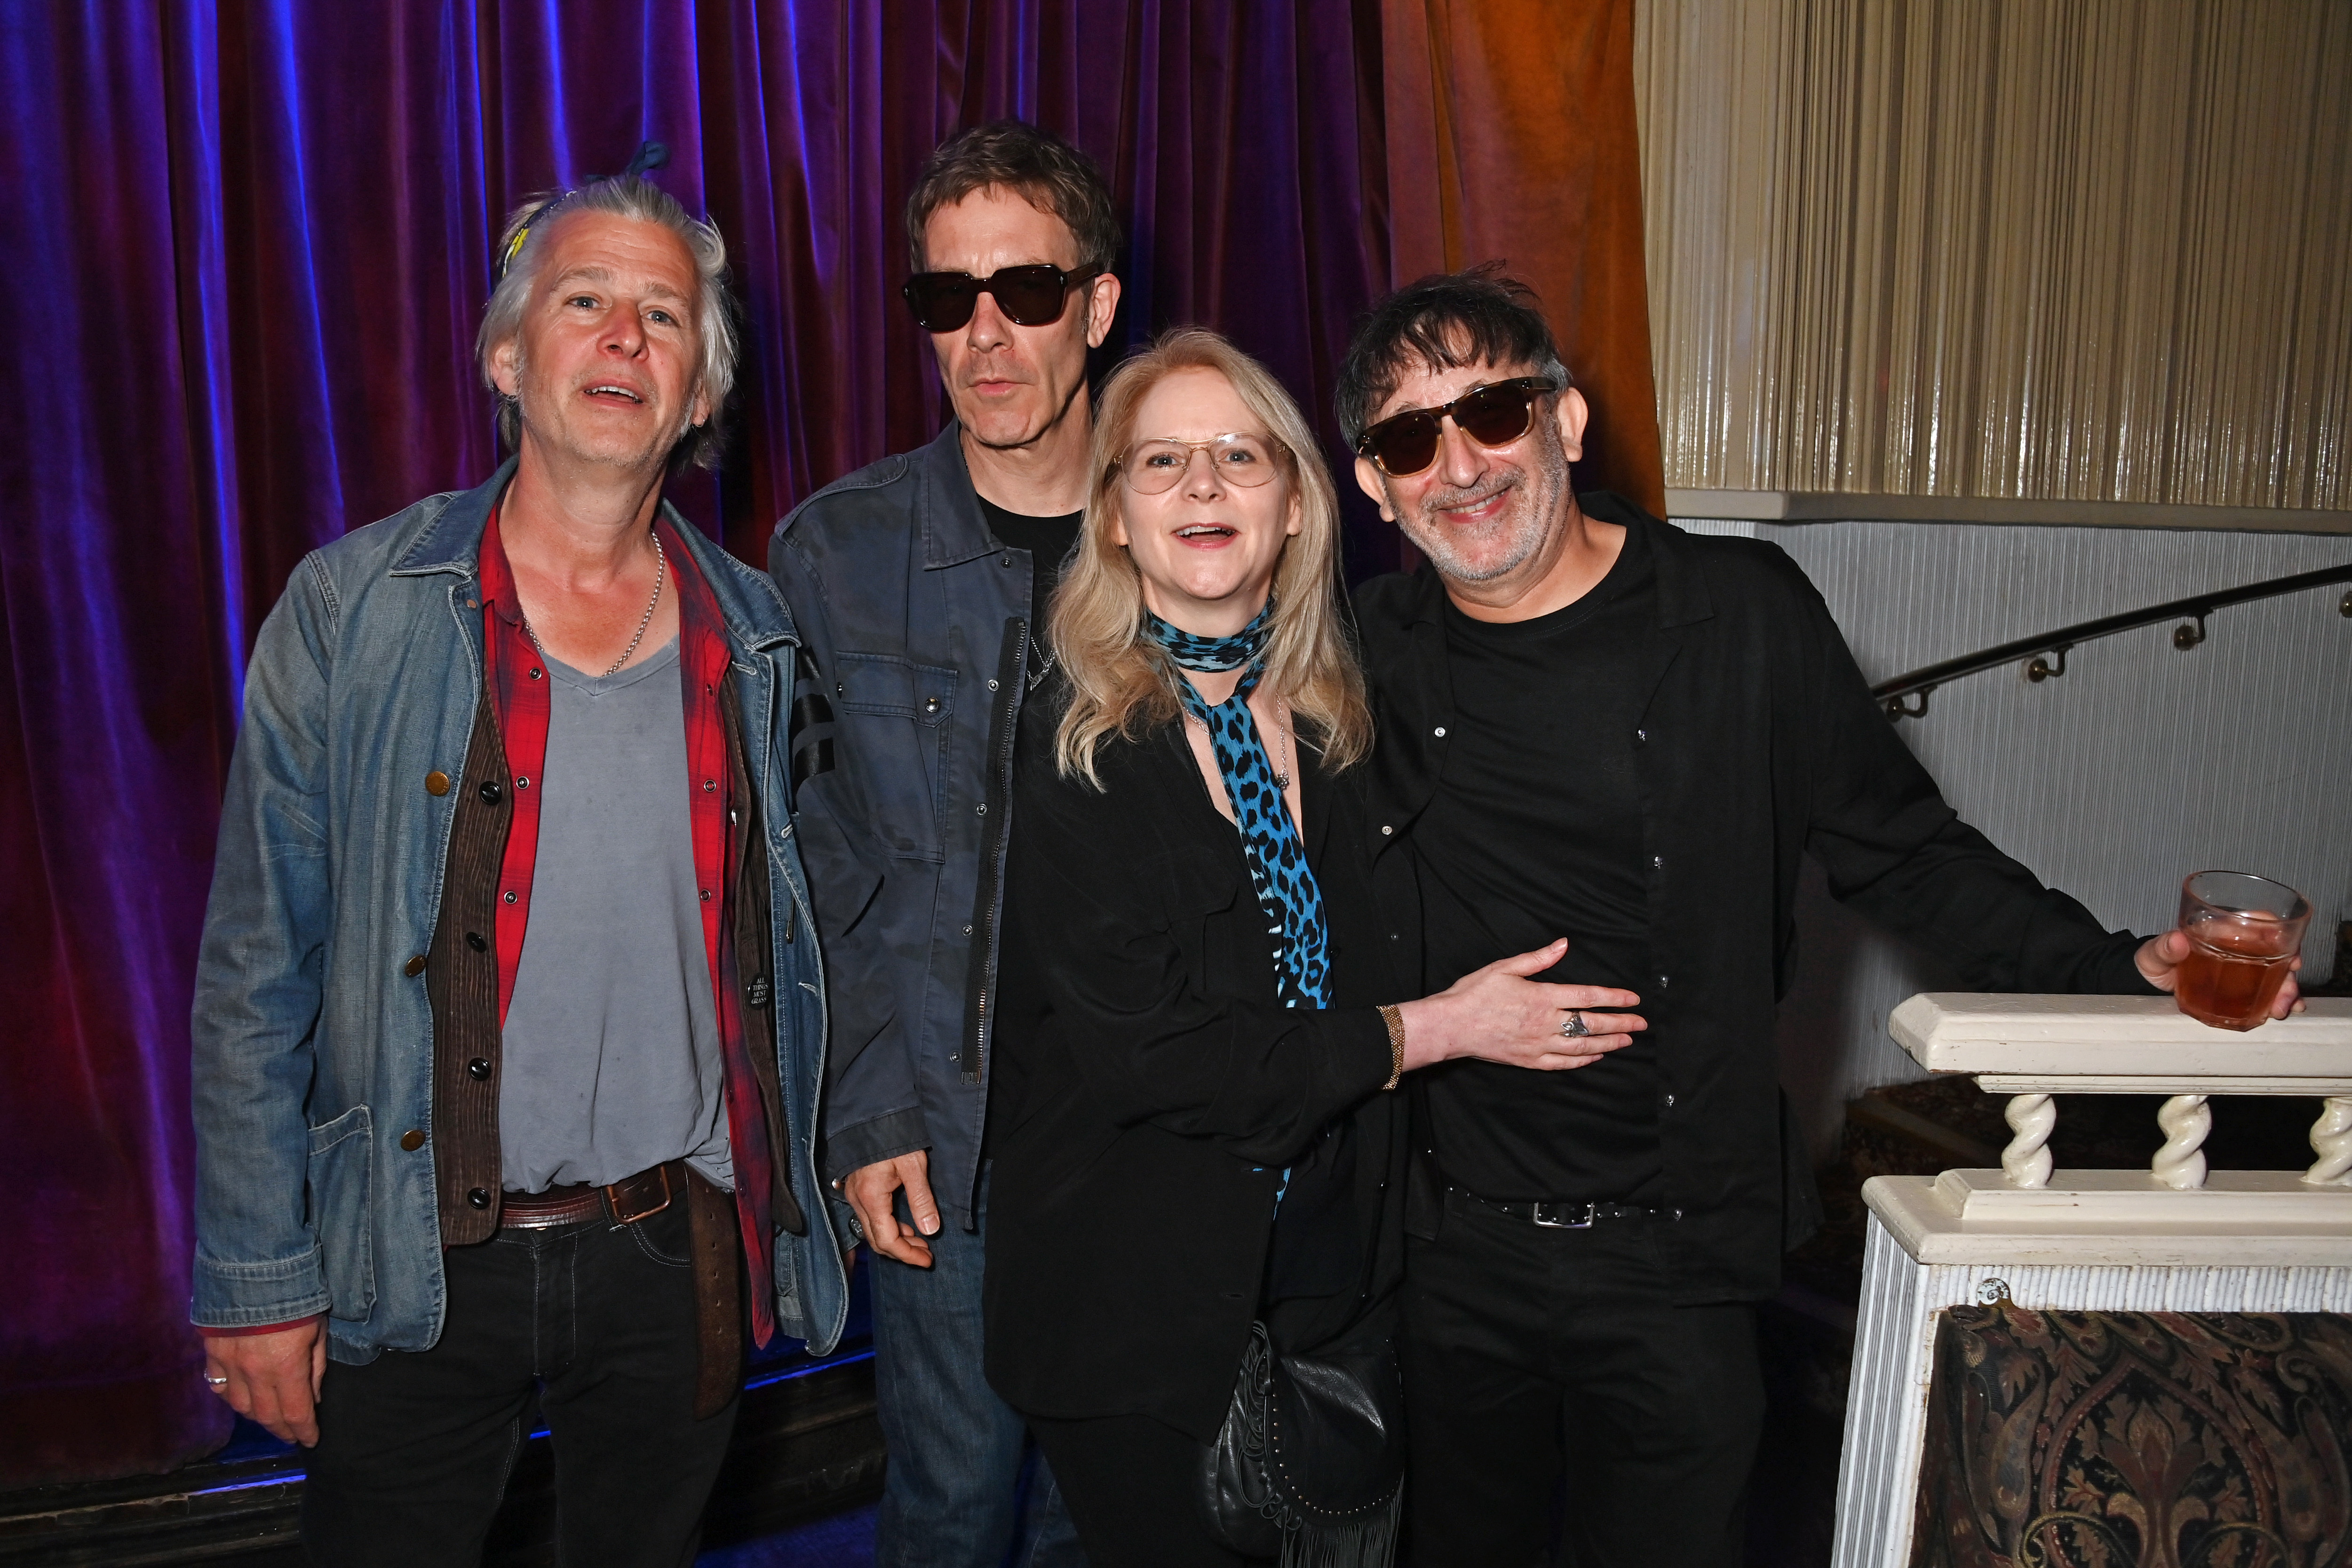 Jason Starkey, Jay Mehler, Lee Starkey, and Ian Broudie at the "Manta of the Cosmos" performance on June 5, 2023, in London, England | Source: Getty Images